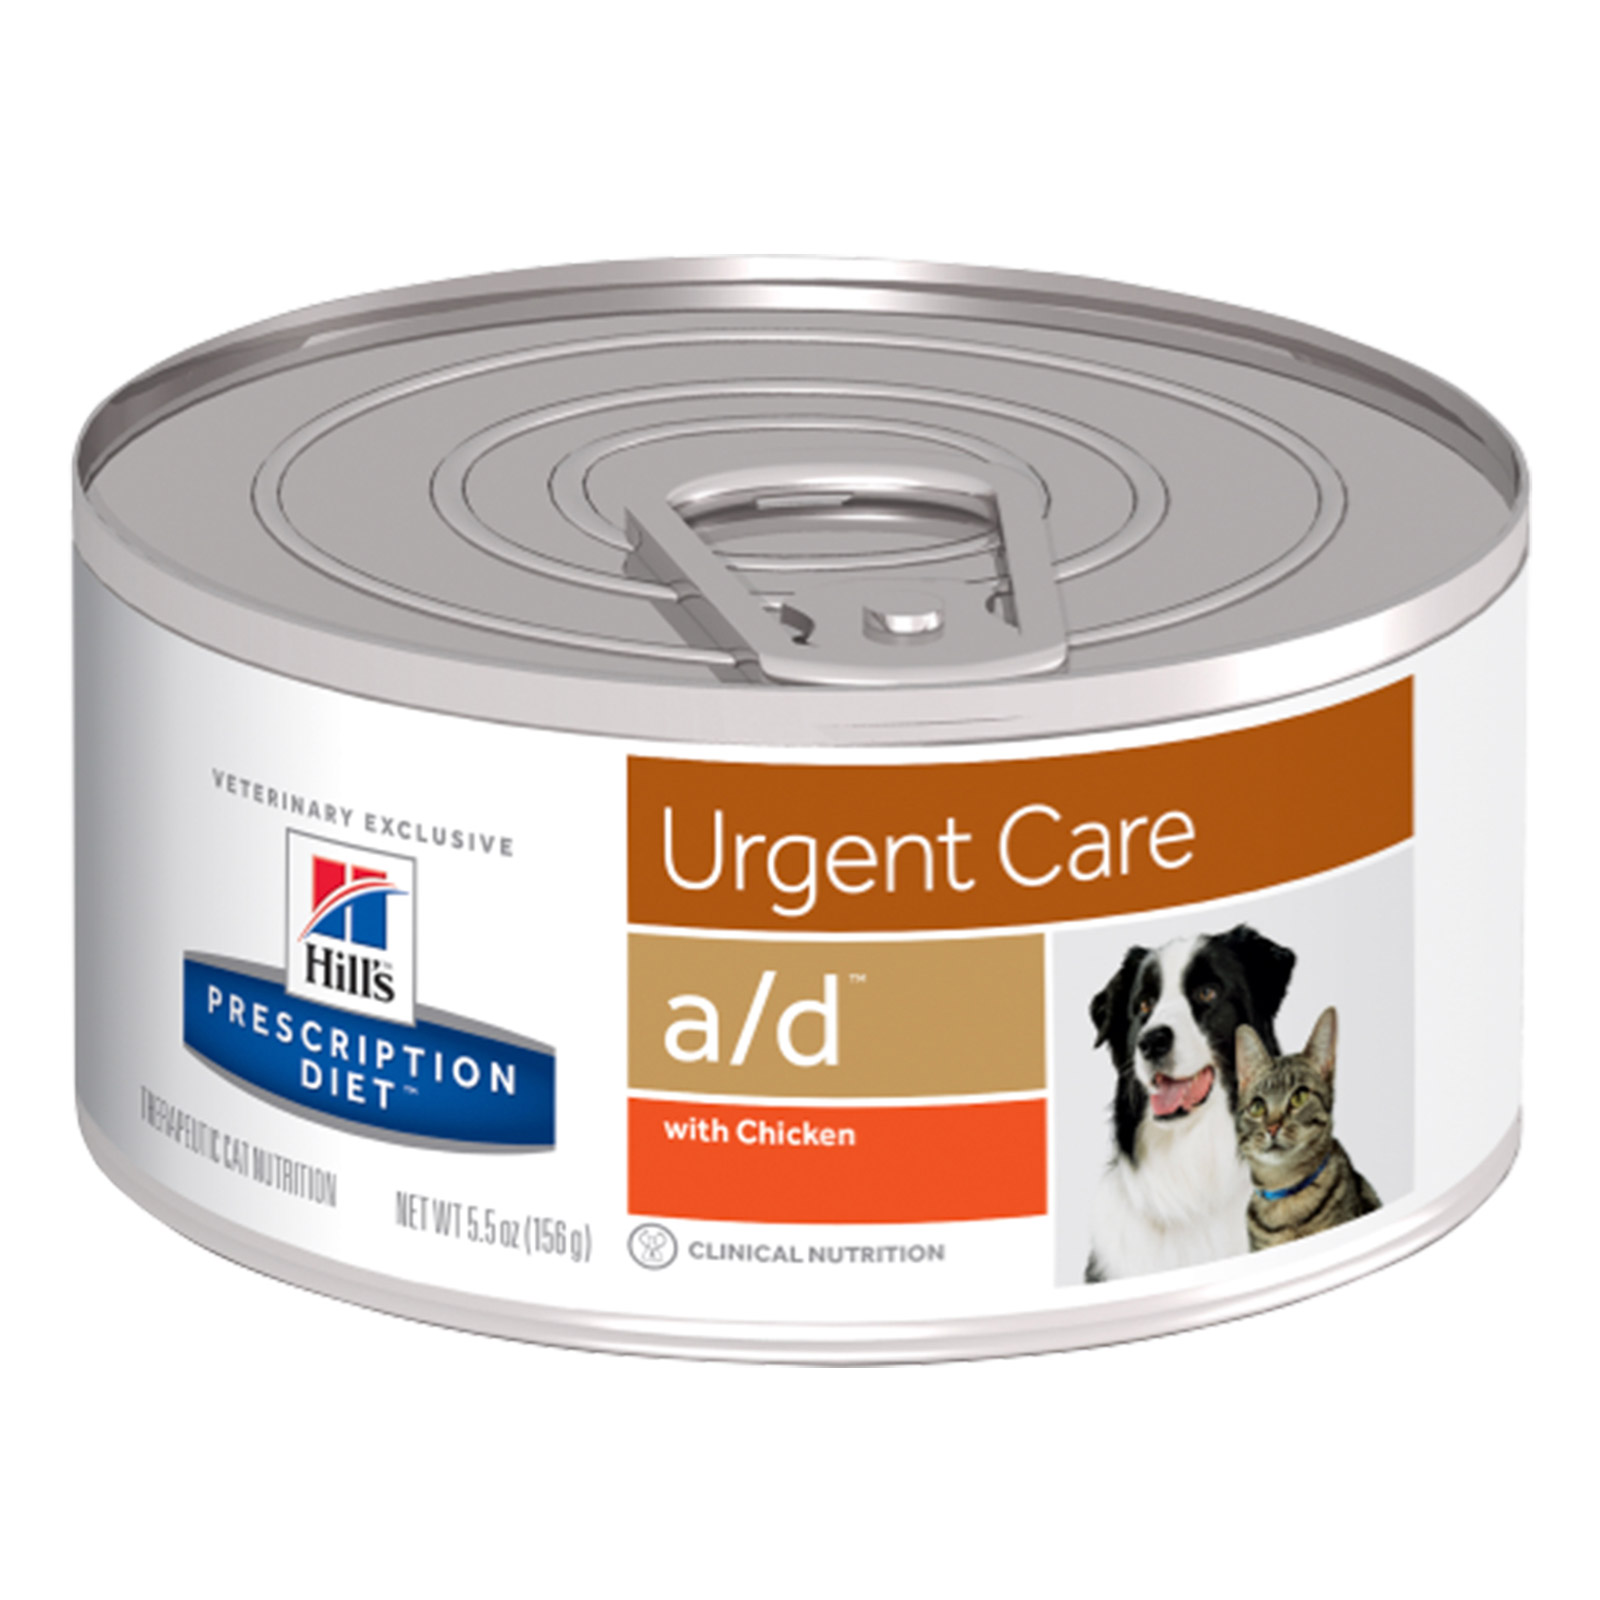 Hill's Prescription Diet a/d Canine/Feline Urgent Care with Chicken Cans 156 Gm